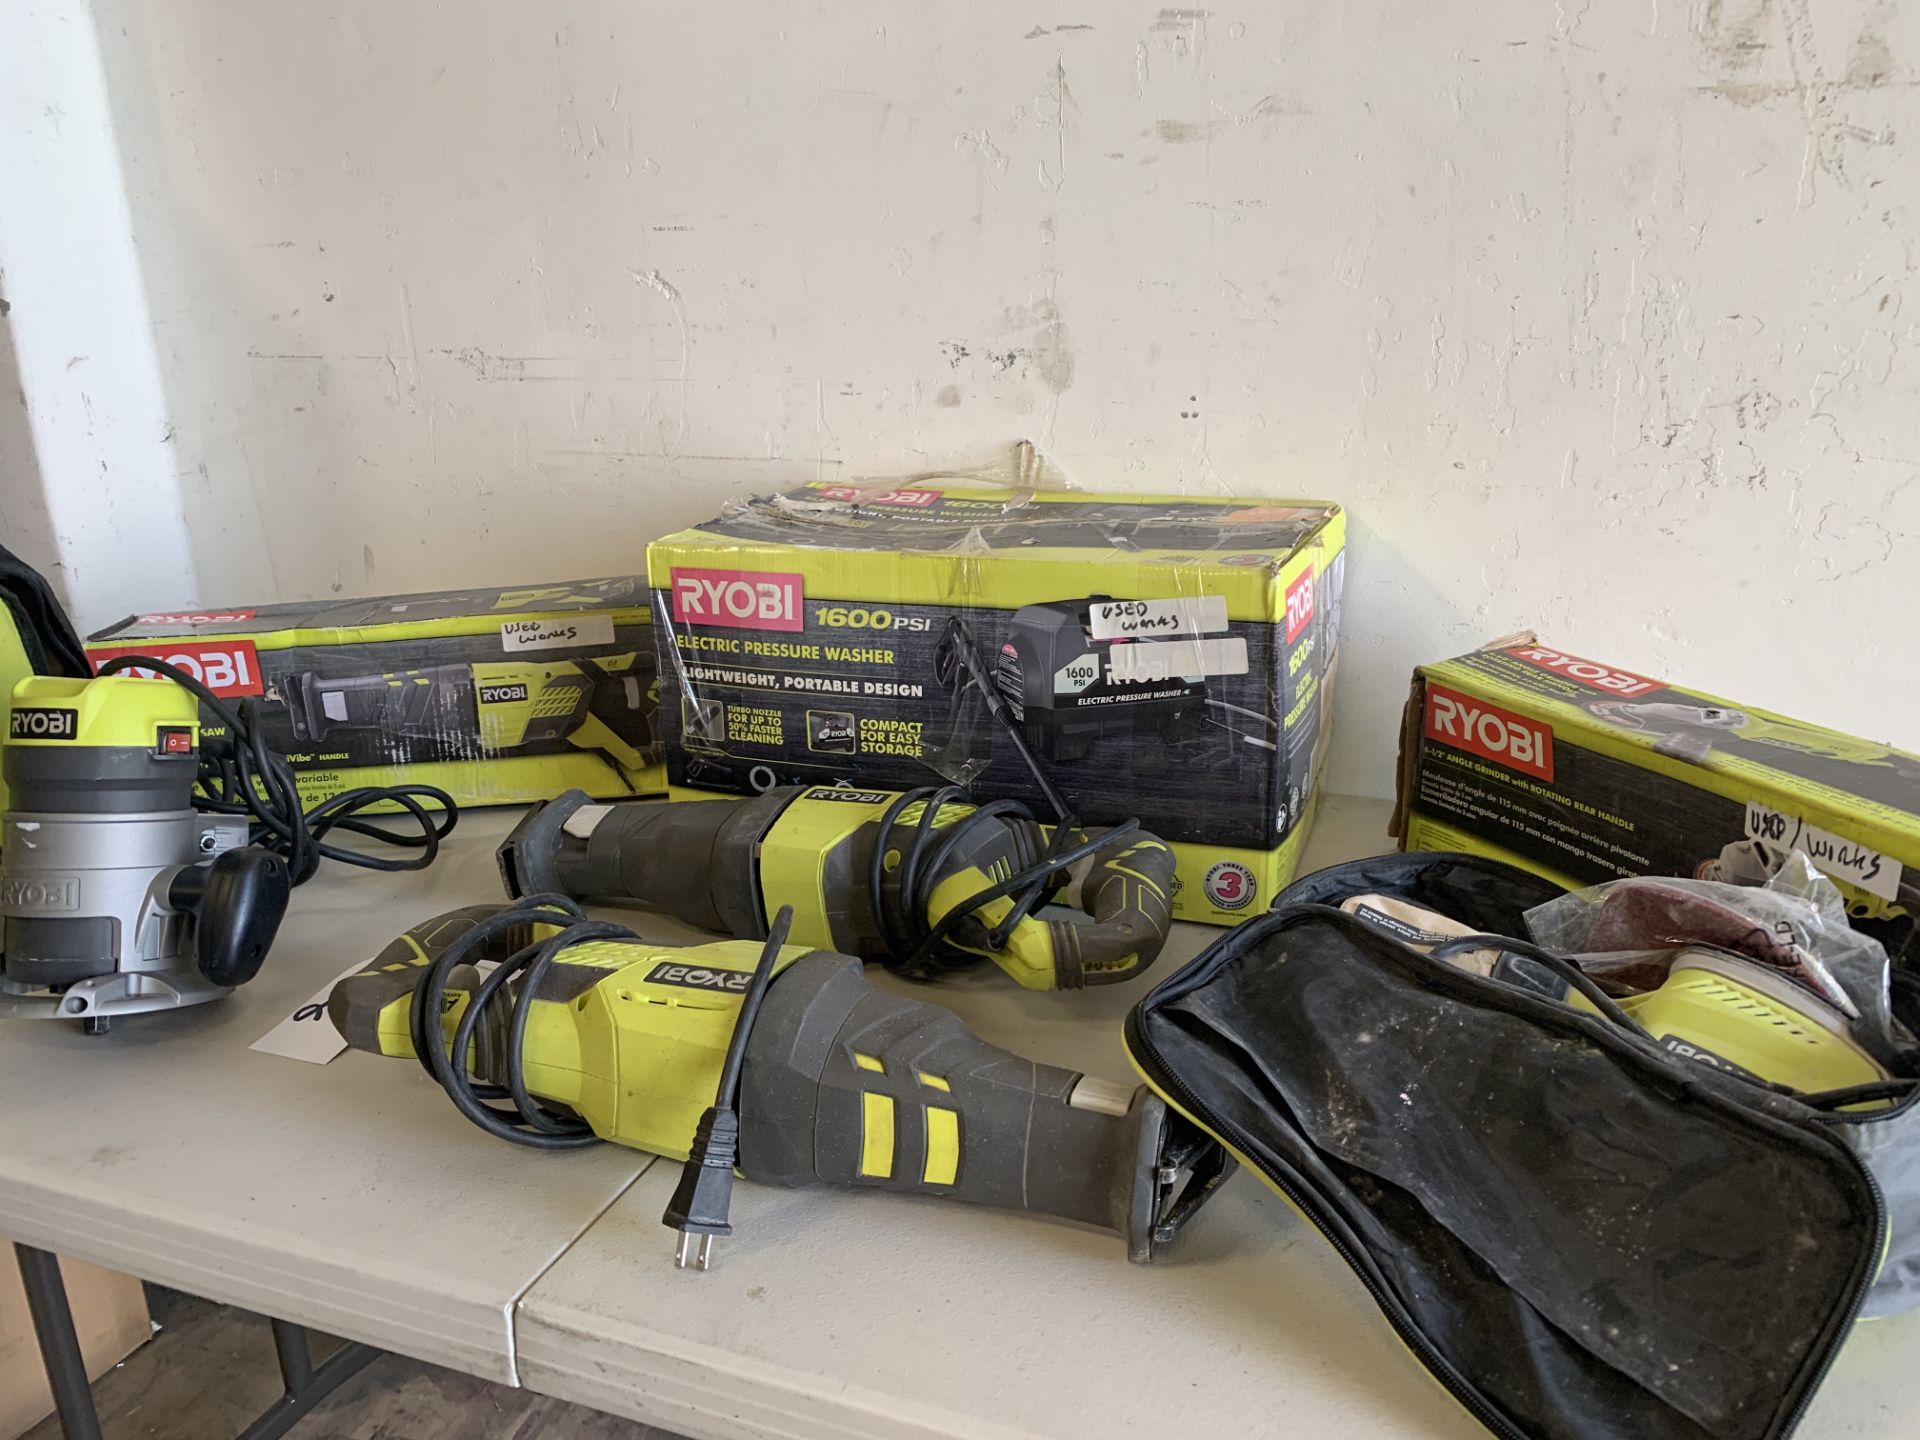 Ryobi Tools: Router, Reciprocating Saws, Sander. (Tested and Works) - Image 2 of 3